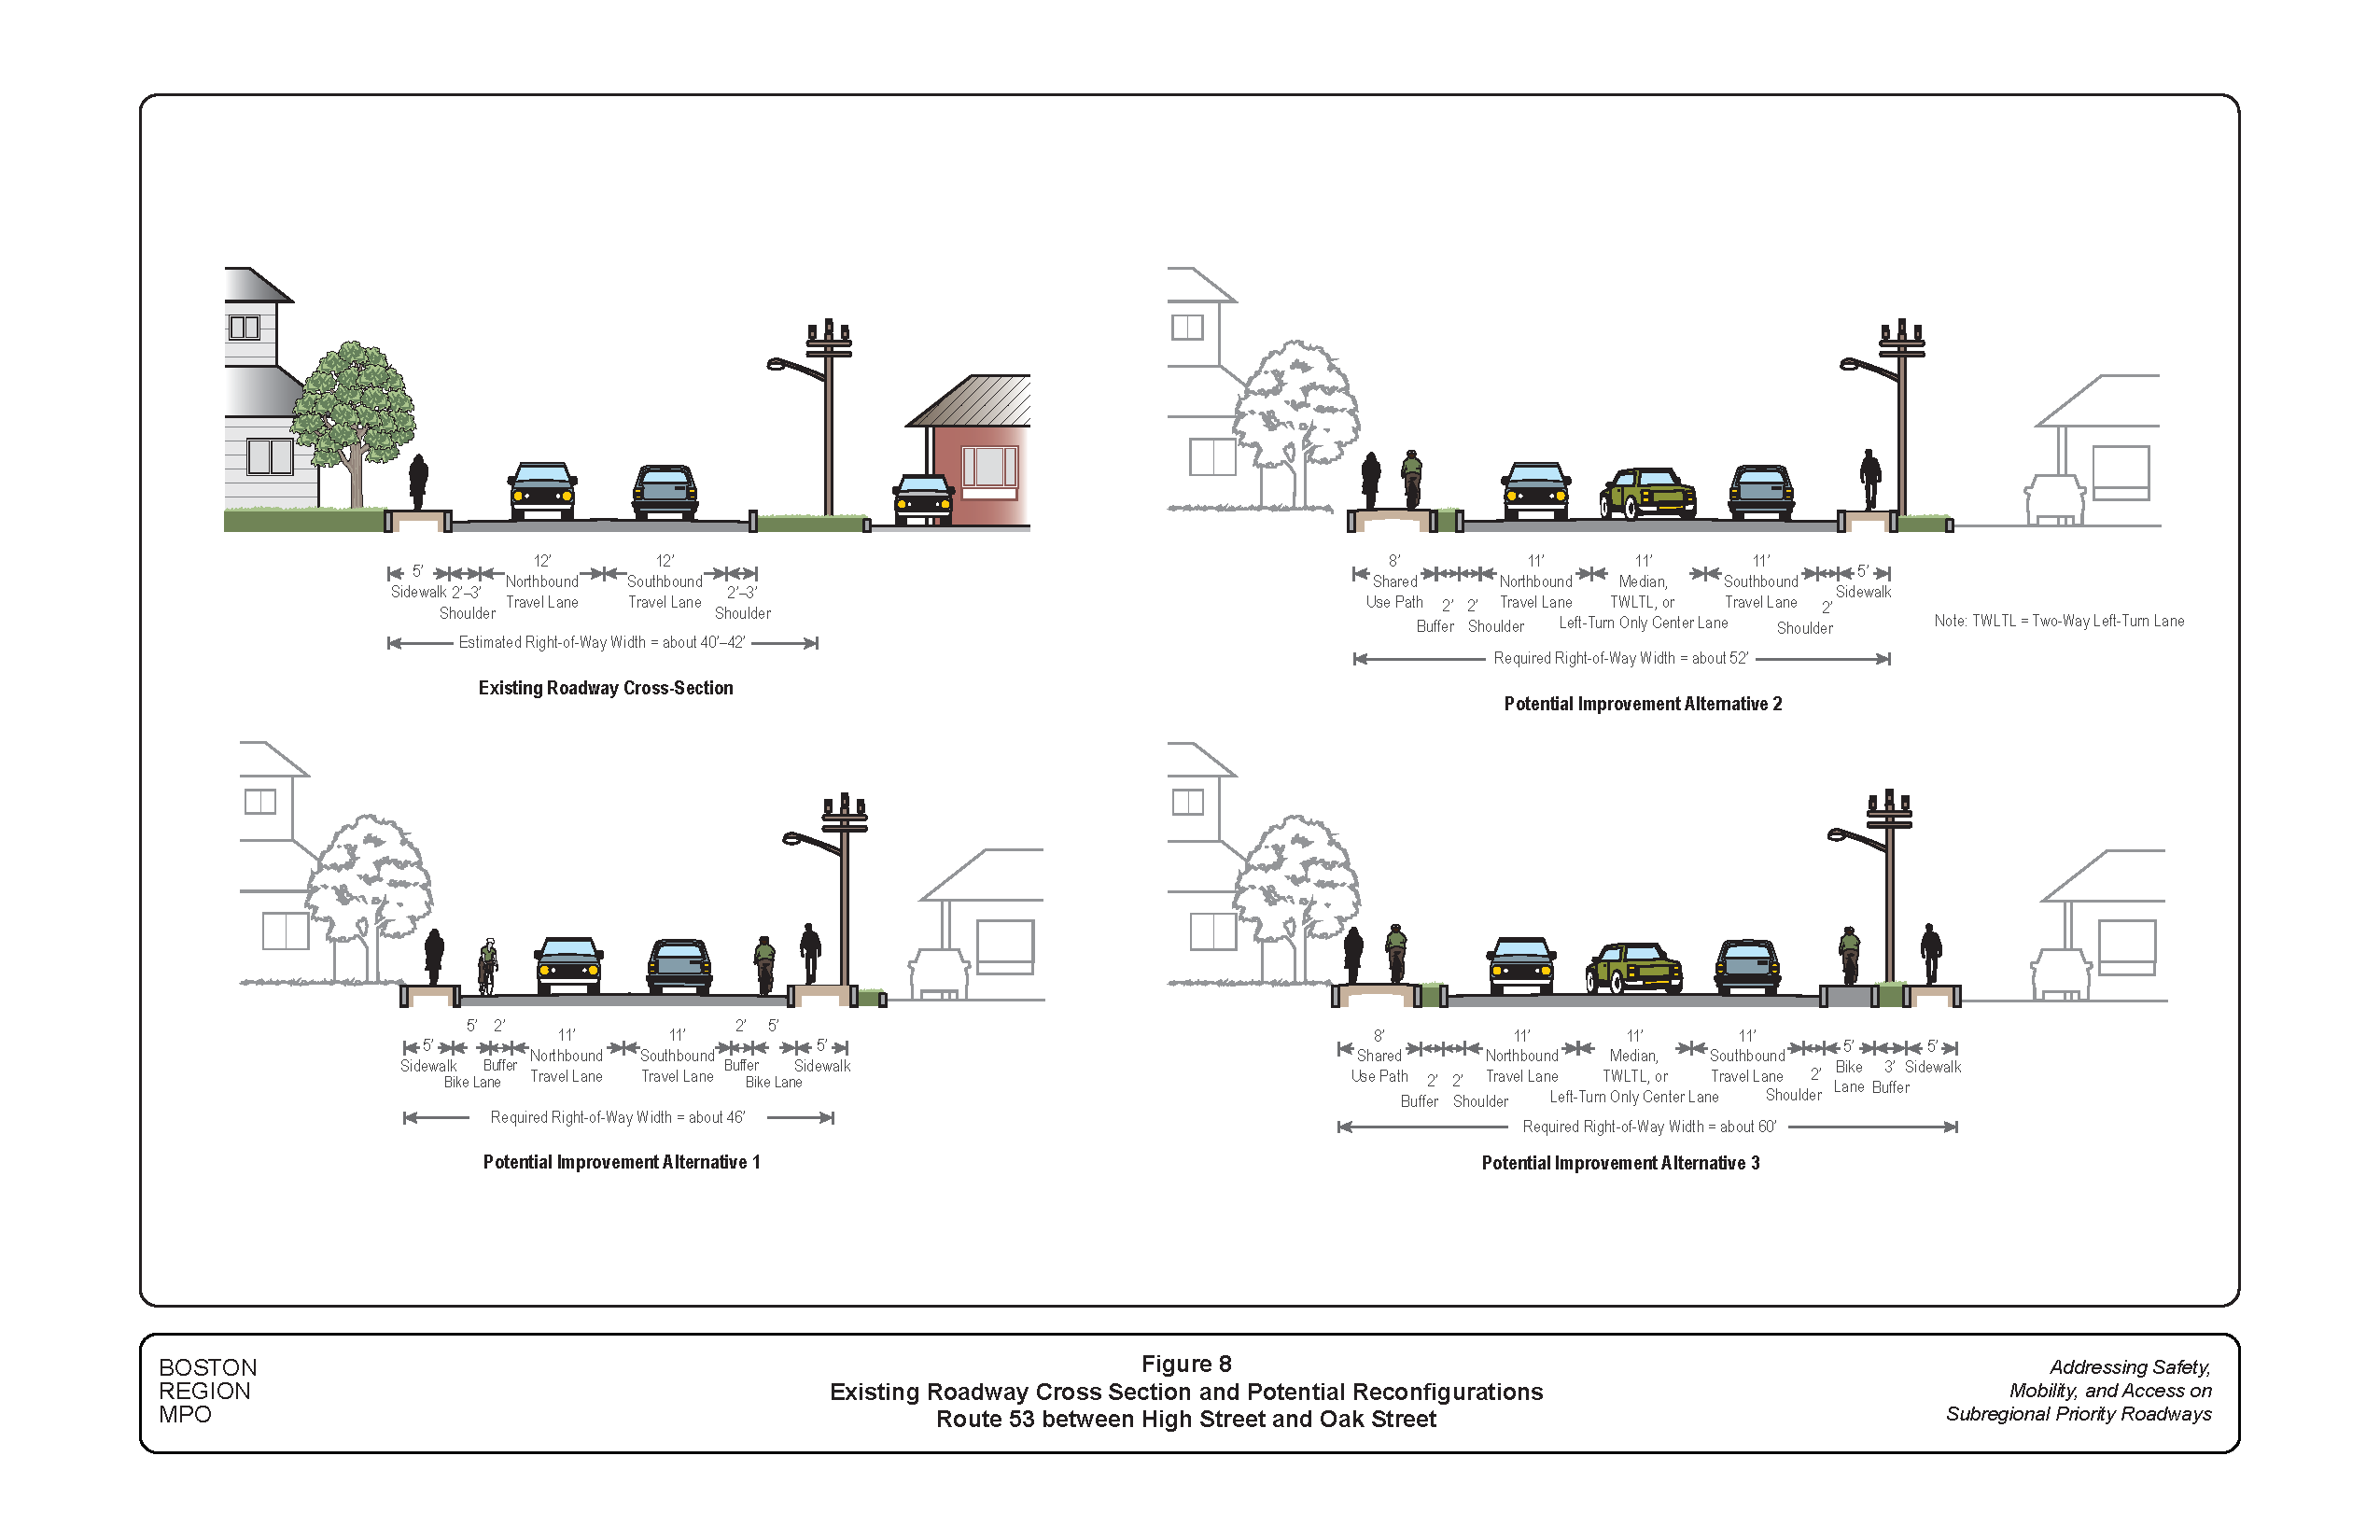 This figure shows the existing roadway cross section of Route 53 between High Street and Oak Street and potential reconfiguration alternatives to accommodate all users of the roadway, including people who walk and people who bike.